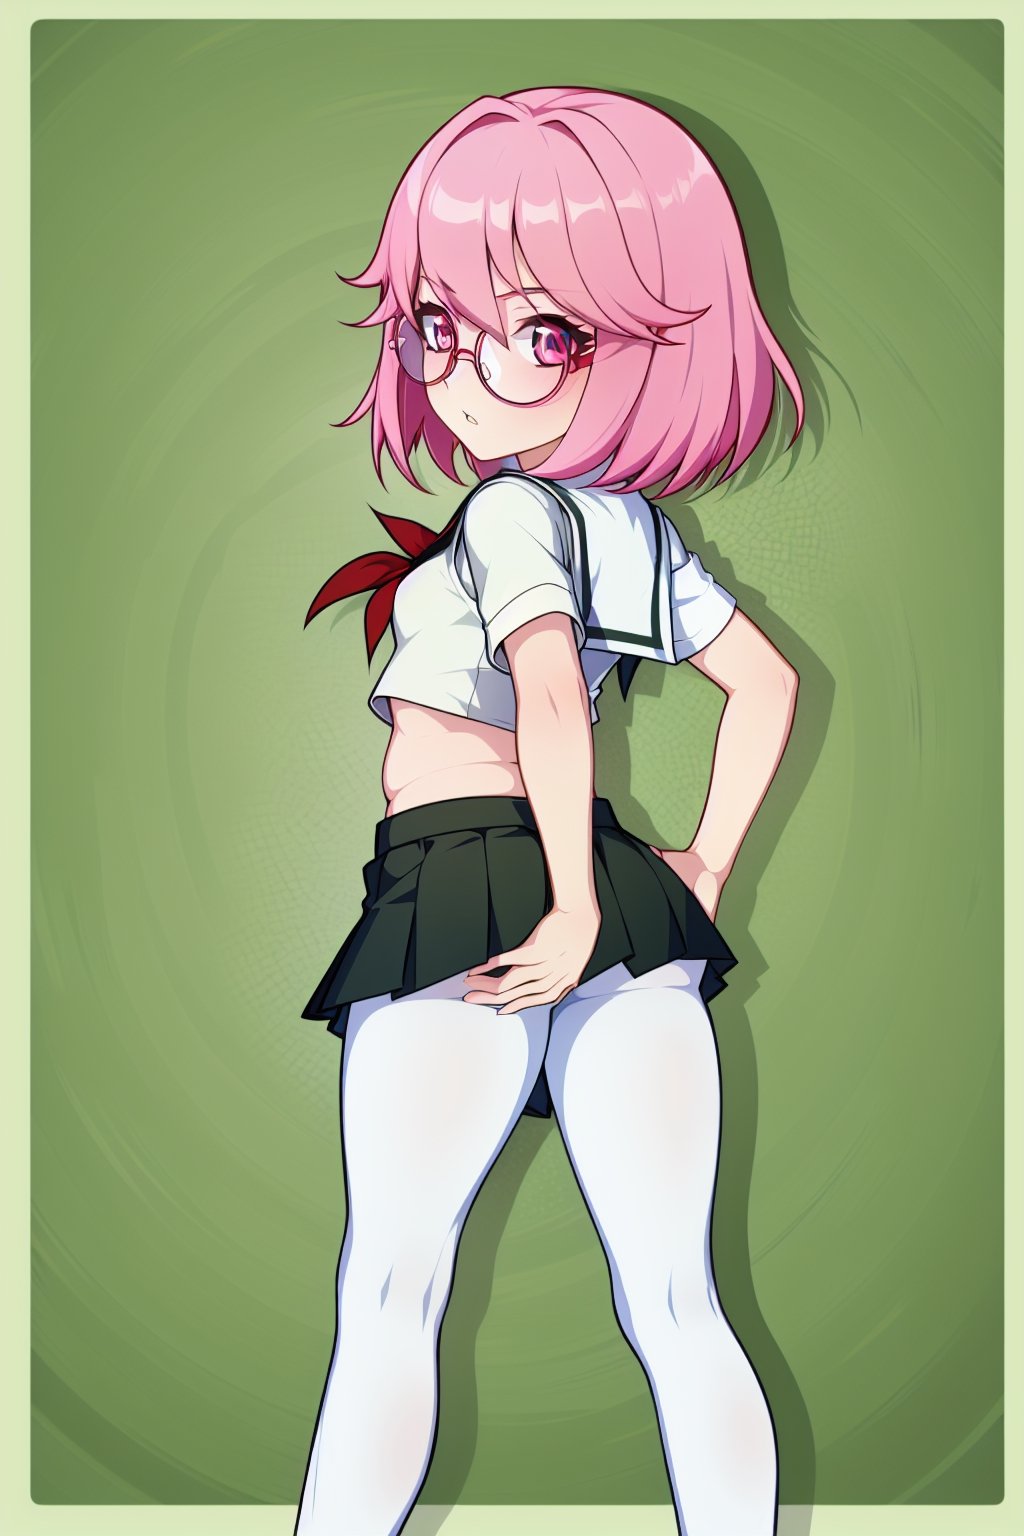 1 girl, solo, Saiki Kusuo, crimson eyes, pale pink hair, disheveled hair, sharp hair, short hair, spiky hair, prickly bangs, emotionless face, calm face, no emotions, cold face, Japanese school uniform, short green skirt, white shirt with short arms, green shirt collar, oval glasses, thin-rimmed glasses, black frames, matte lenses, the eyes are not visible behind the lenses of the glasses, white stockings, black flat shoes, perfect body, plump ass, tight ass, sexy ass, perfect ass, slim waist, thin shoulders, small breasts, moist skin, perfect body, abs, detailed intimate places, slim hips, elastic hips,

,